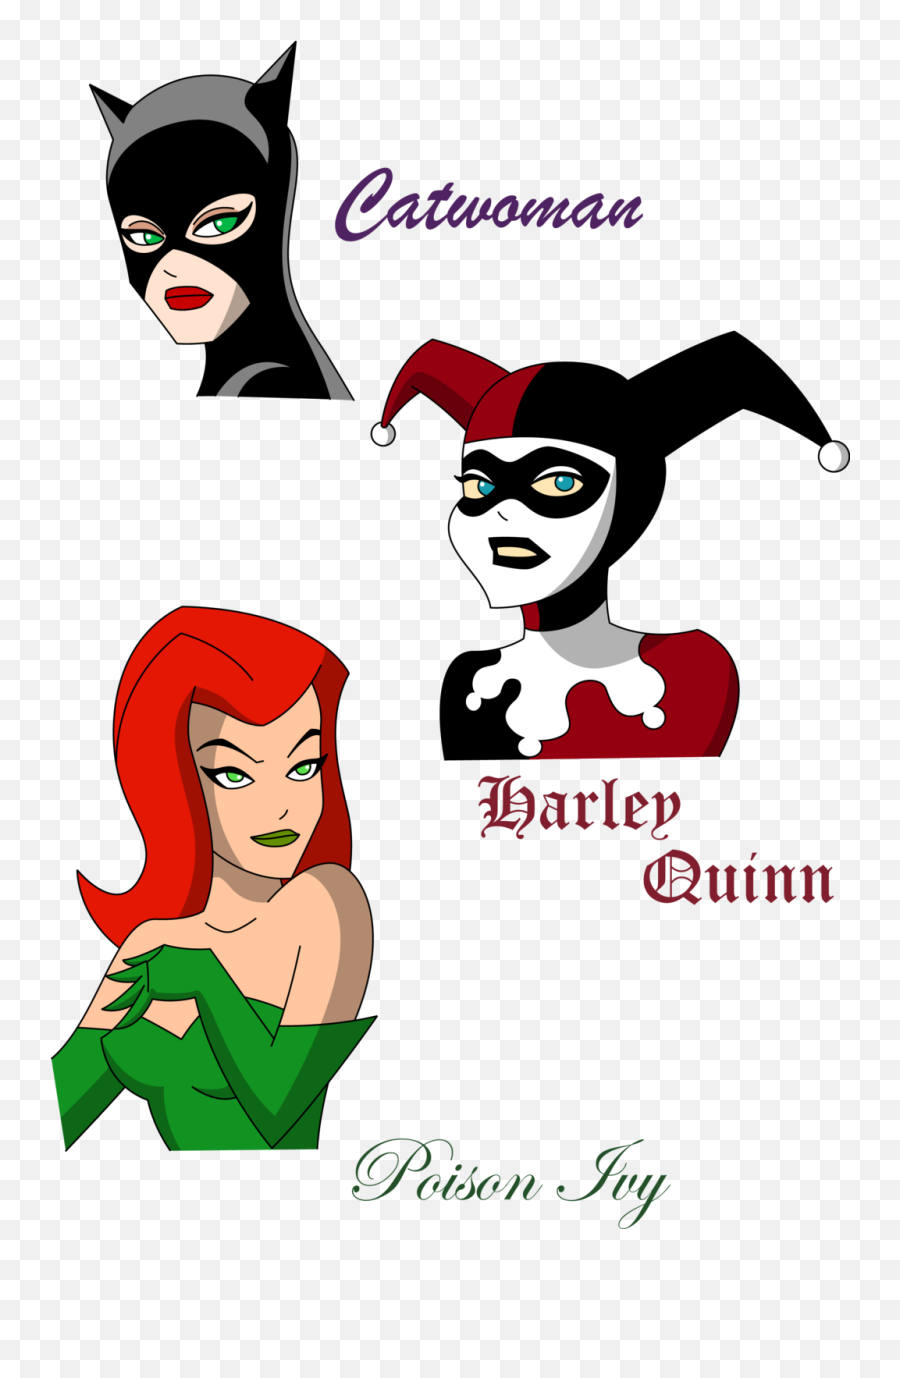 Poison Ivy Png - Lego Harley Quinn Poison Ivy Catwoman Emoji,How To Get Harley Quinn Emojis